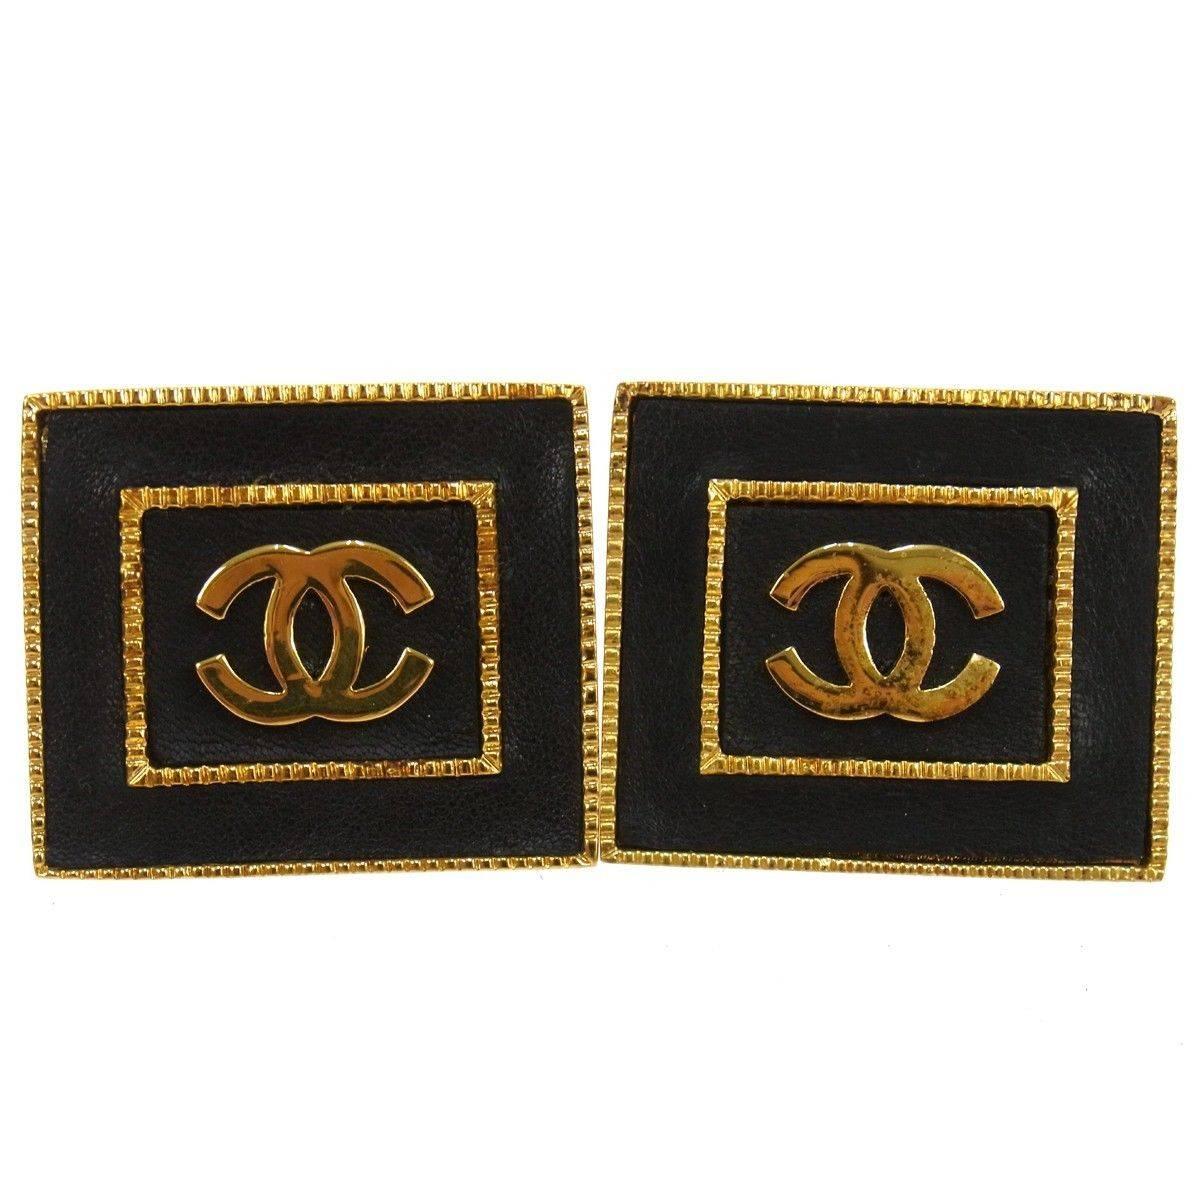 Chanel Rare Vintage Black Leather Gold Charm Large Evening Stud Square Earrings